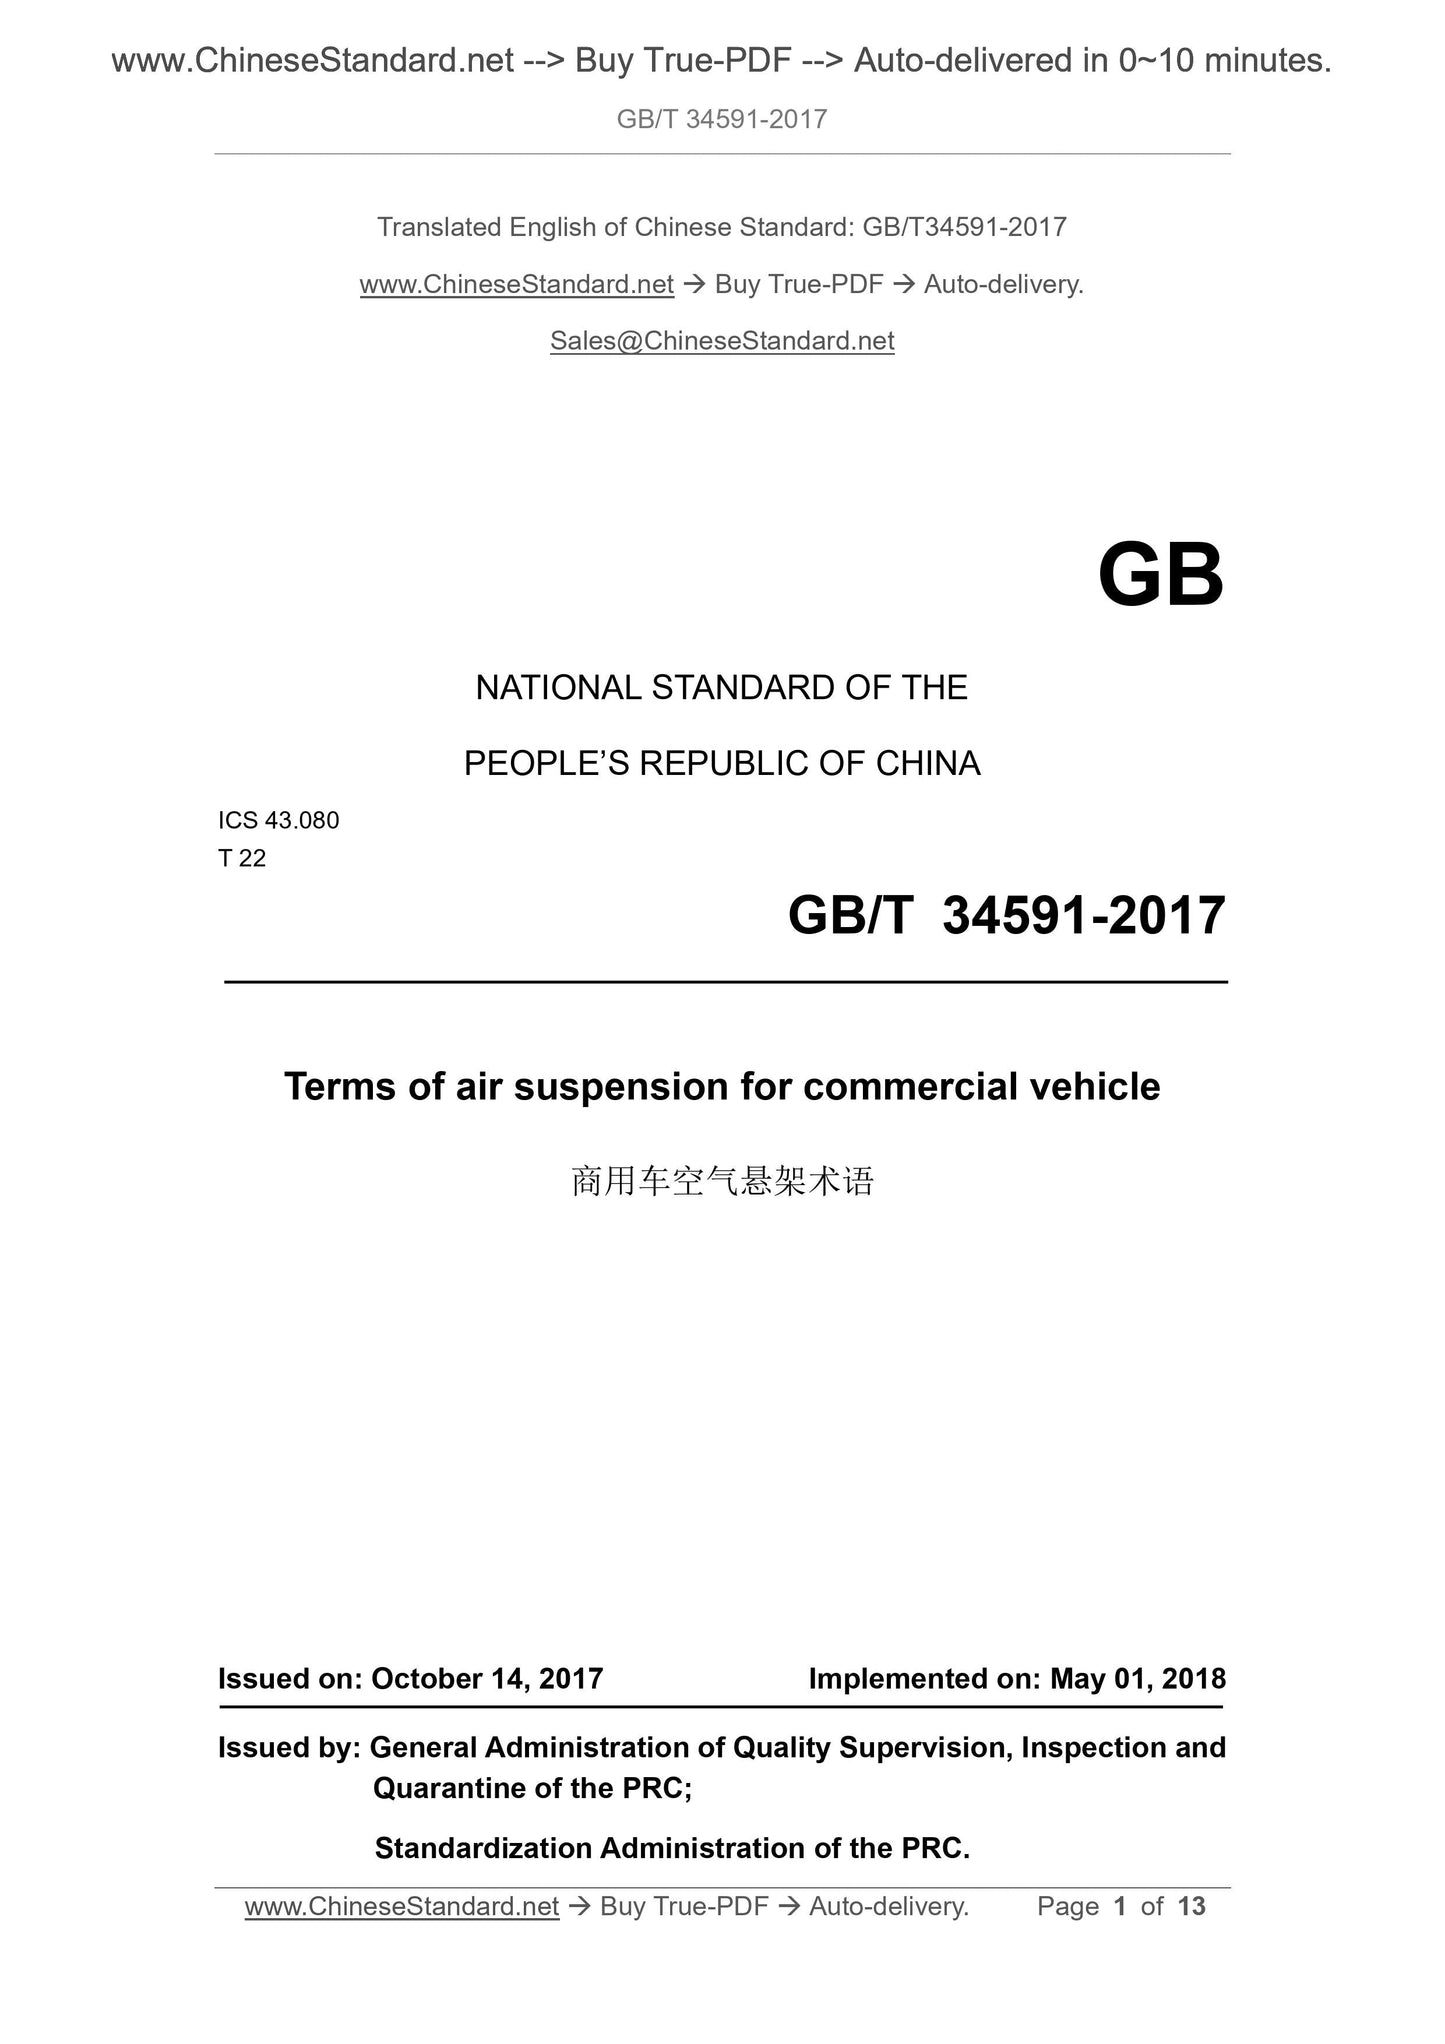 GB/T 34591-2017 Page 1